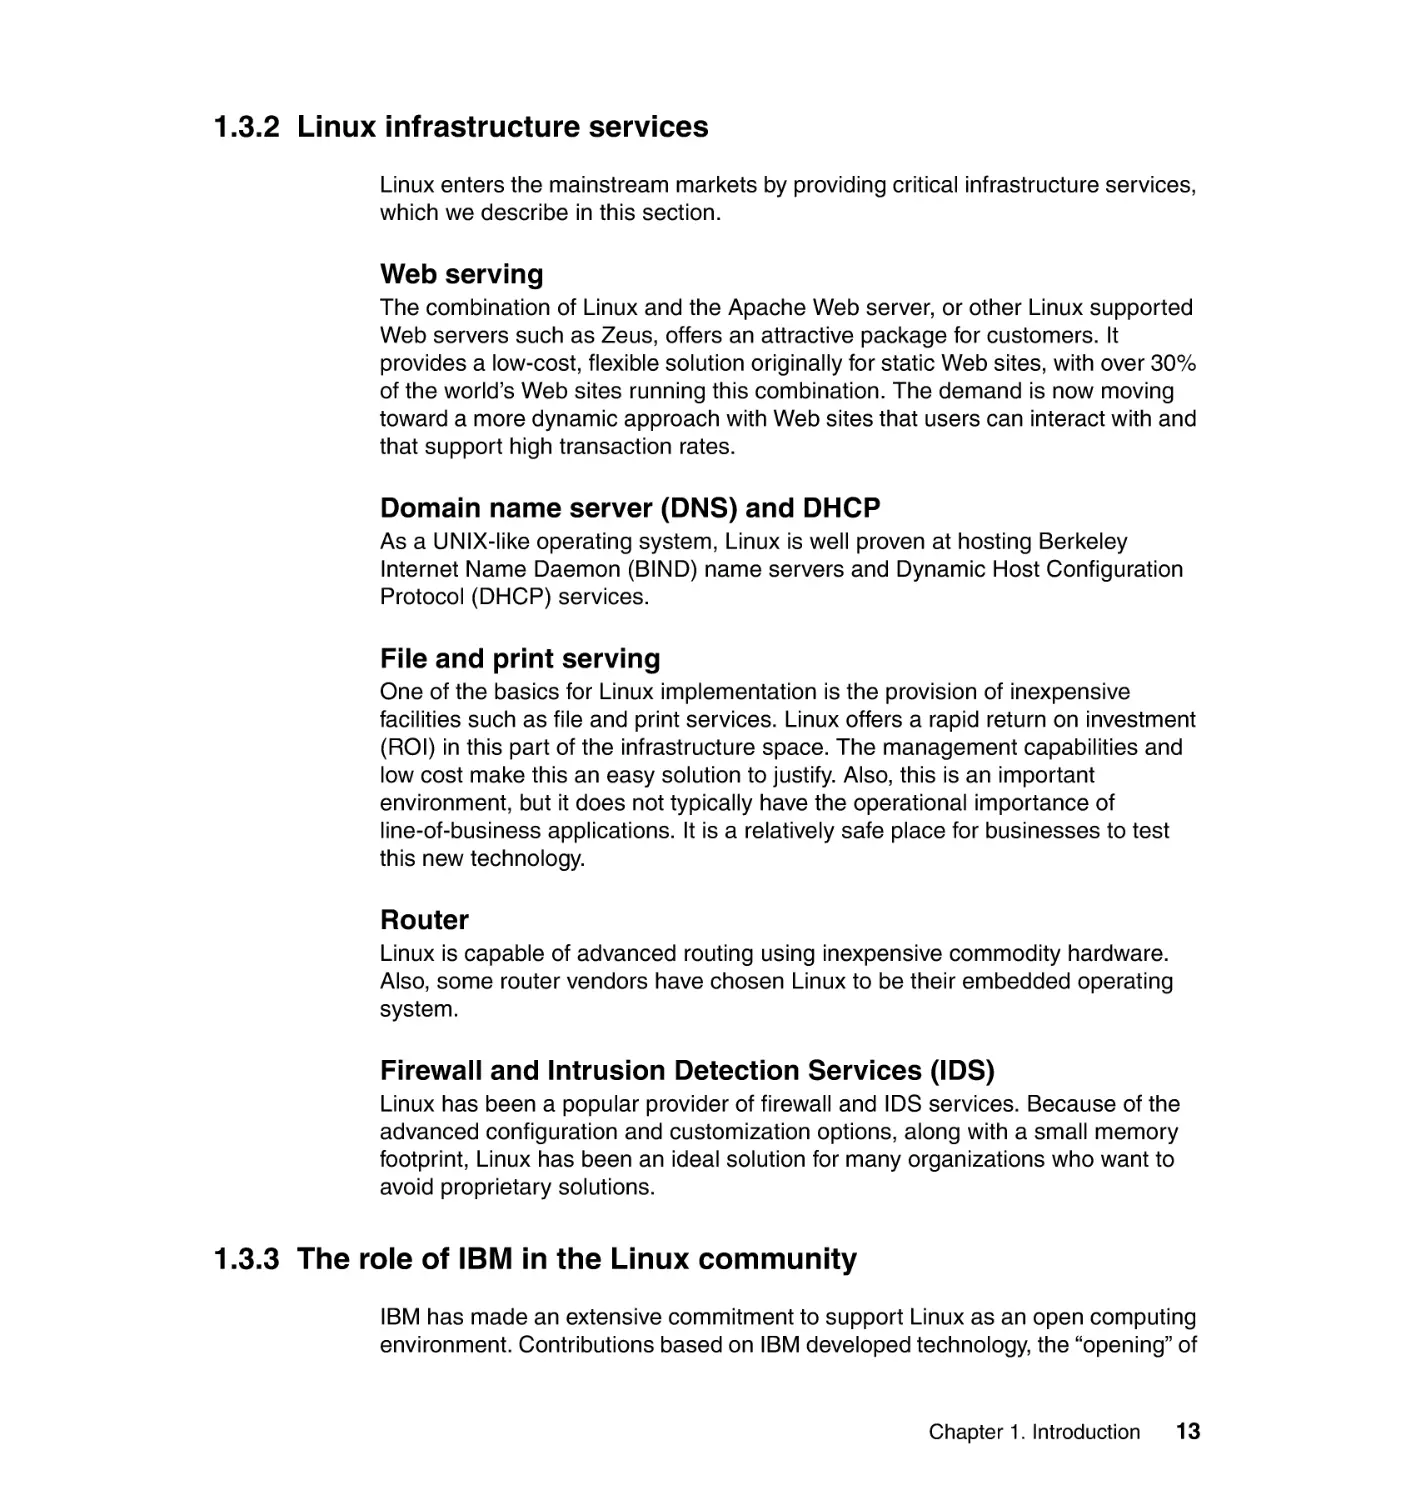 1.3.2 Linux infrastructure services
1.3.3 The role of IBM in the Linux community